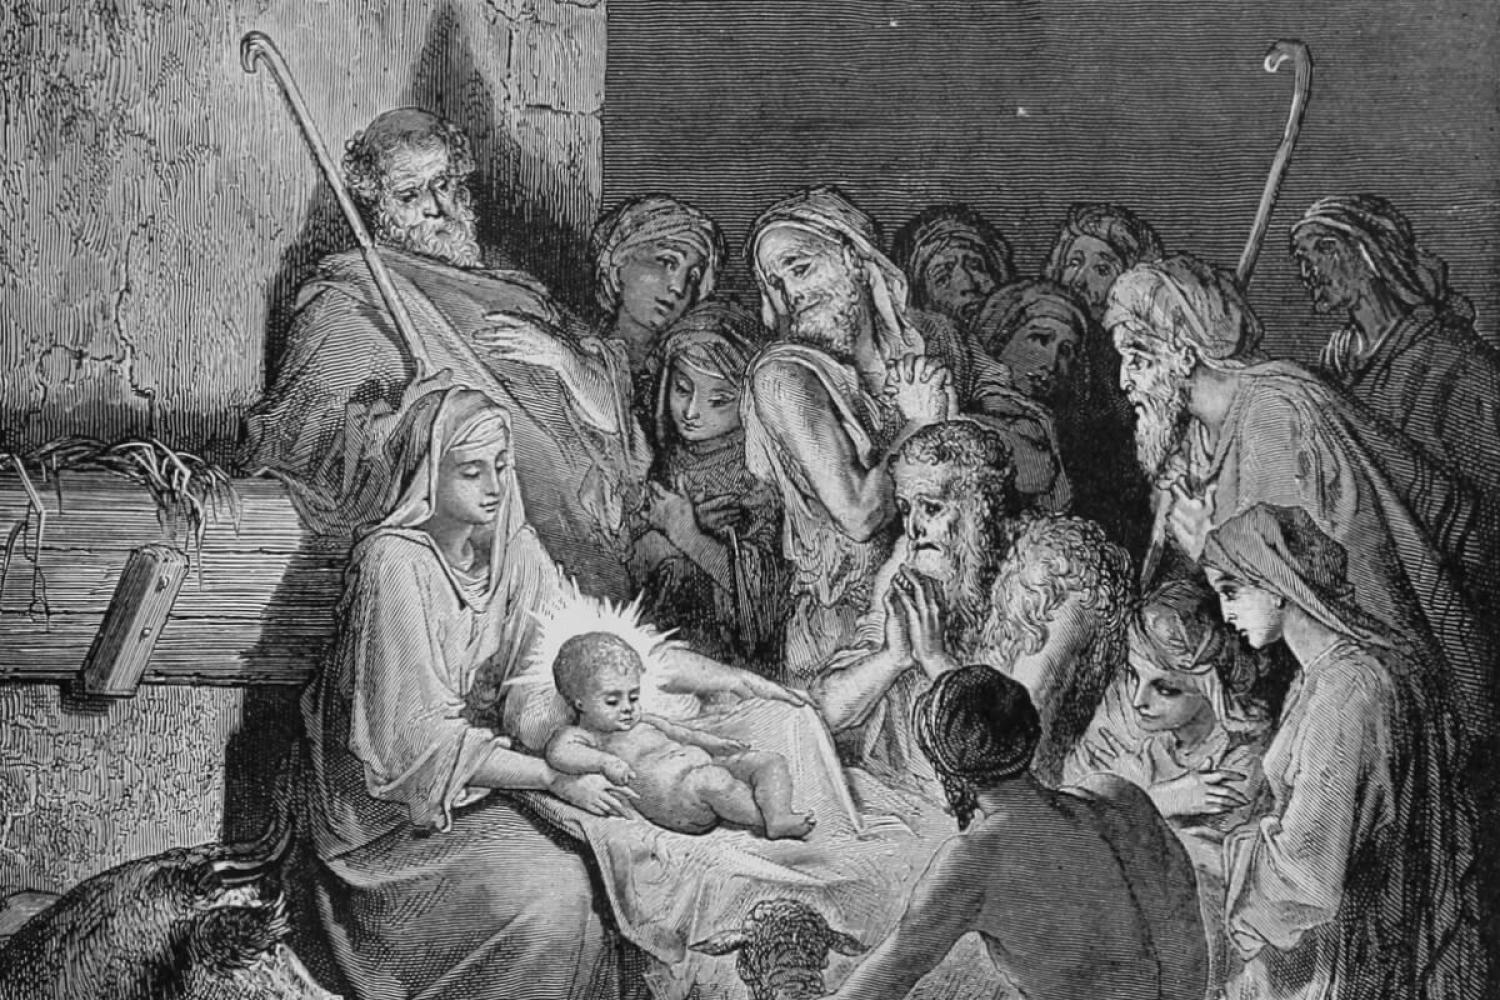 "The Nativity," by Gustave Dore